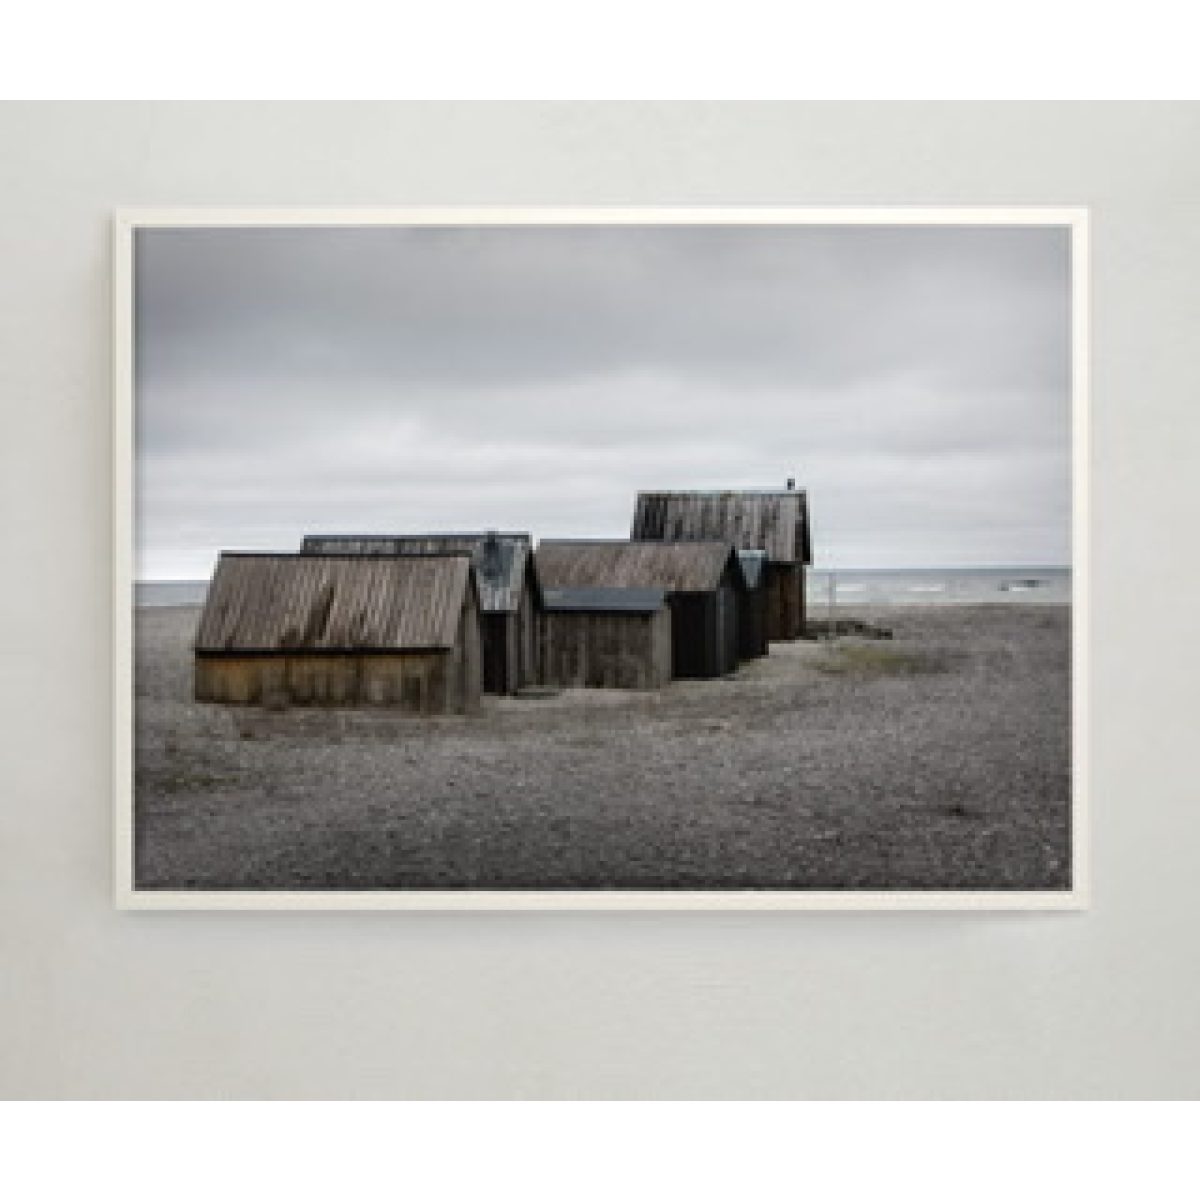 Cluster Of Sheds Poster 30x40 cm Storefactory My Home and More